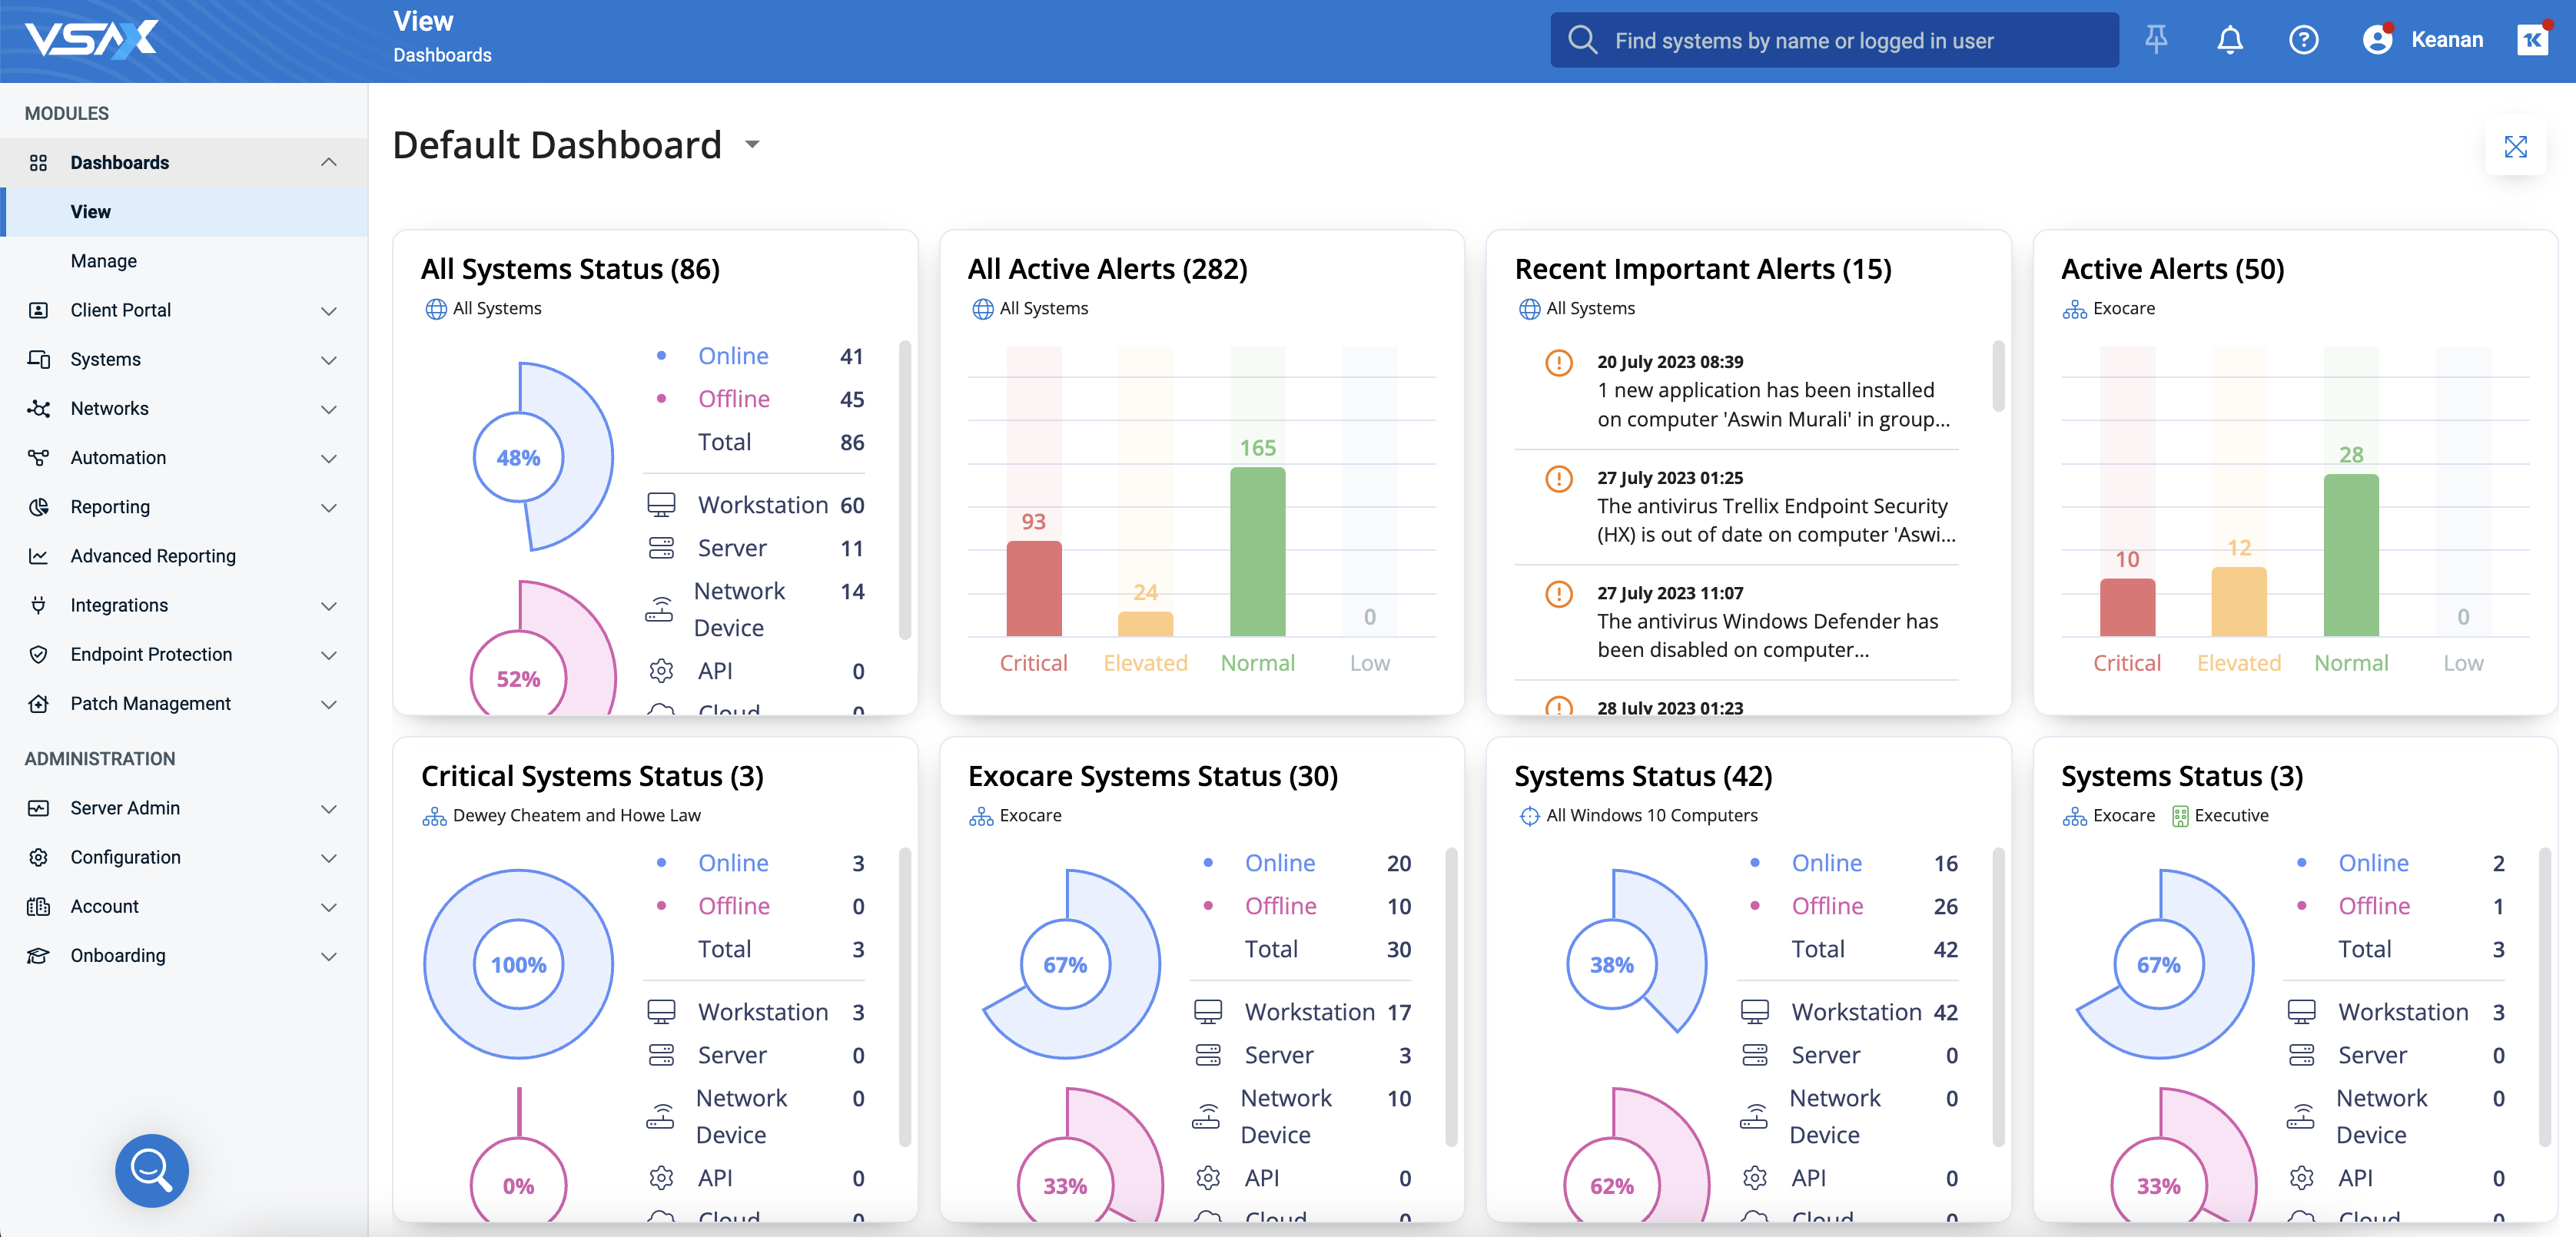 VSA 10 Dashboards and Client/Dept Management